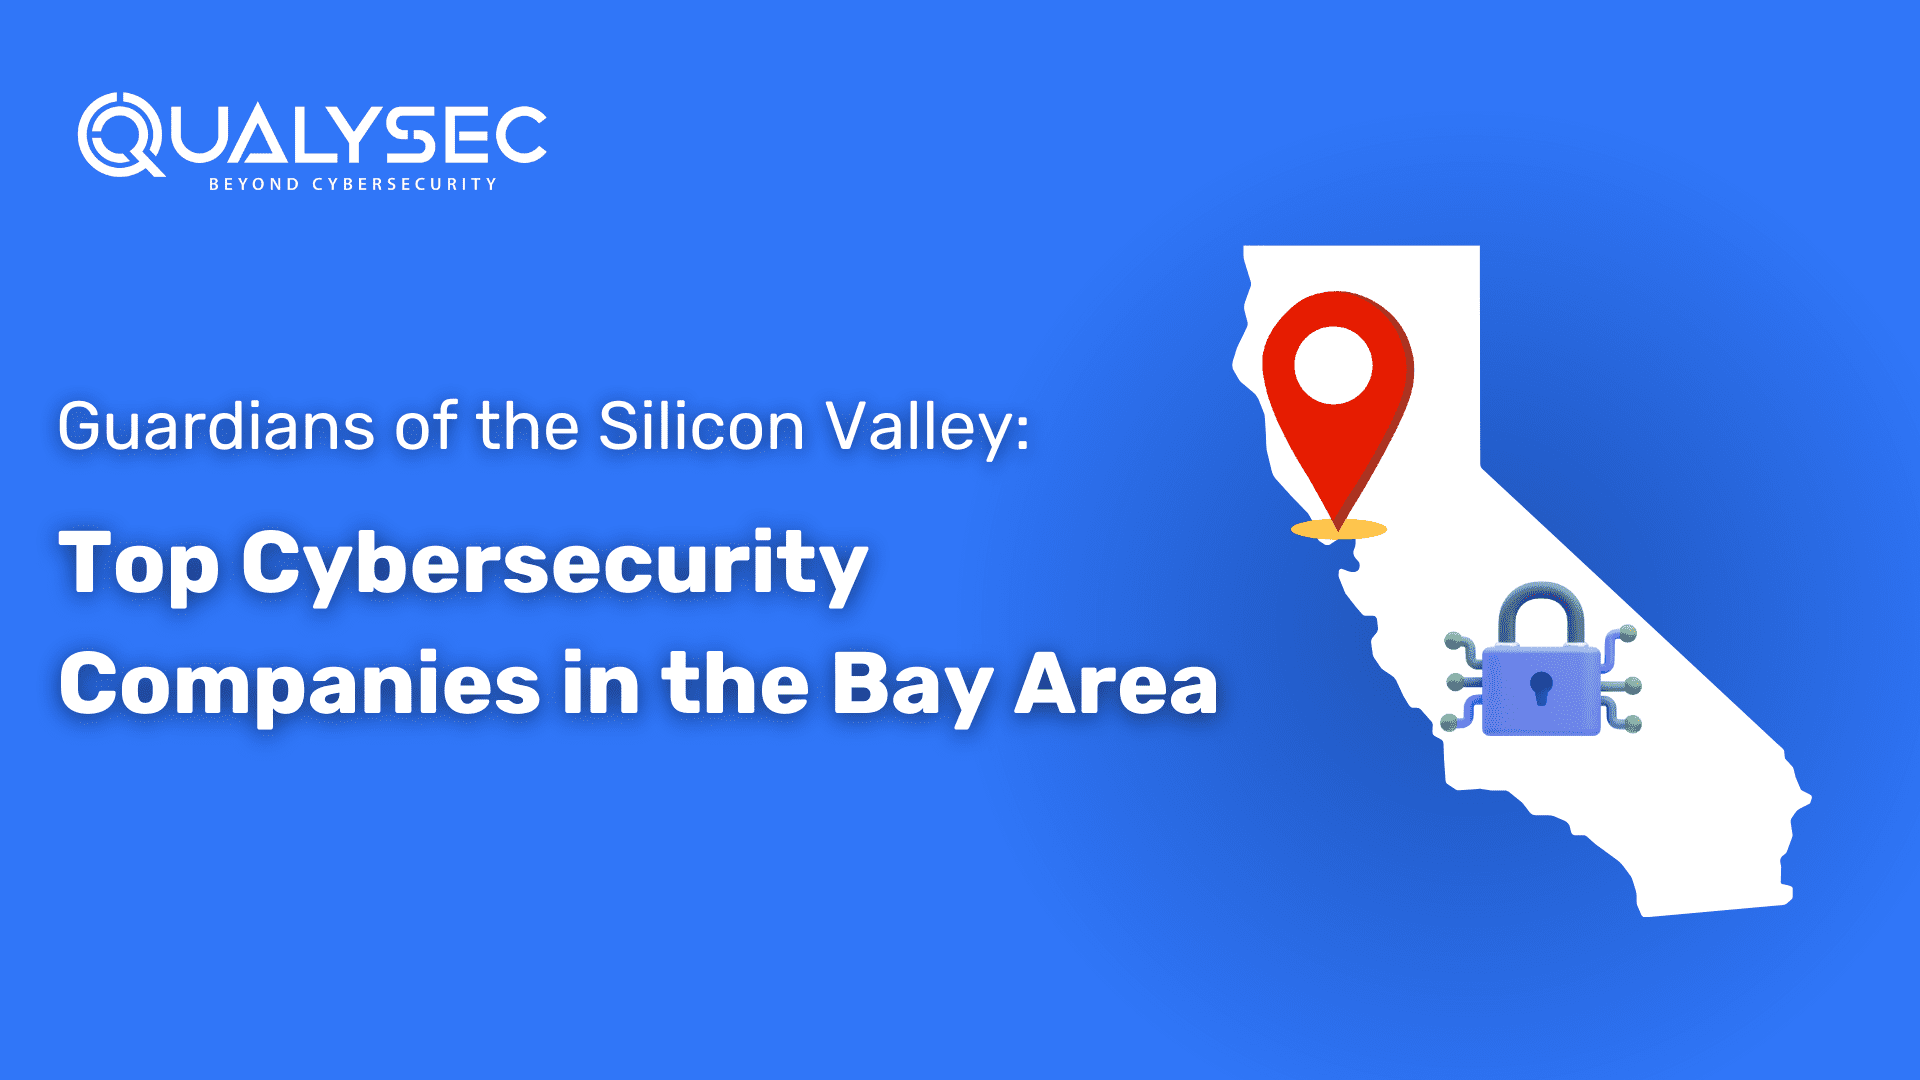 Top Cybersecurity Companies in the Bay Area